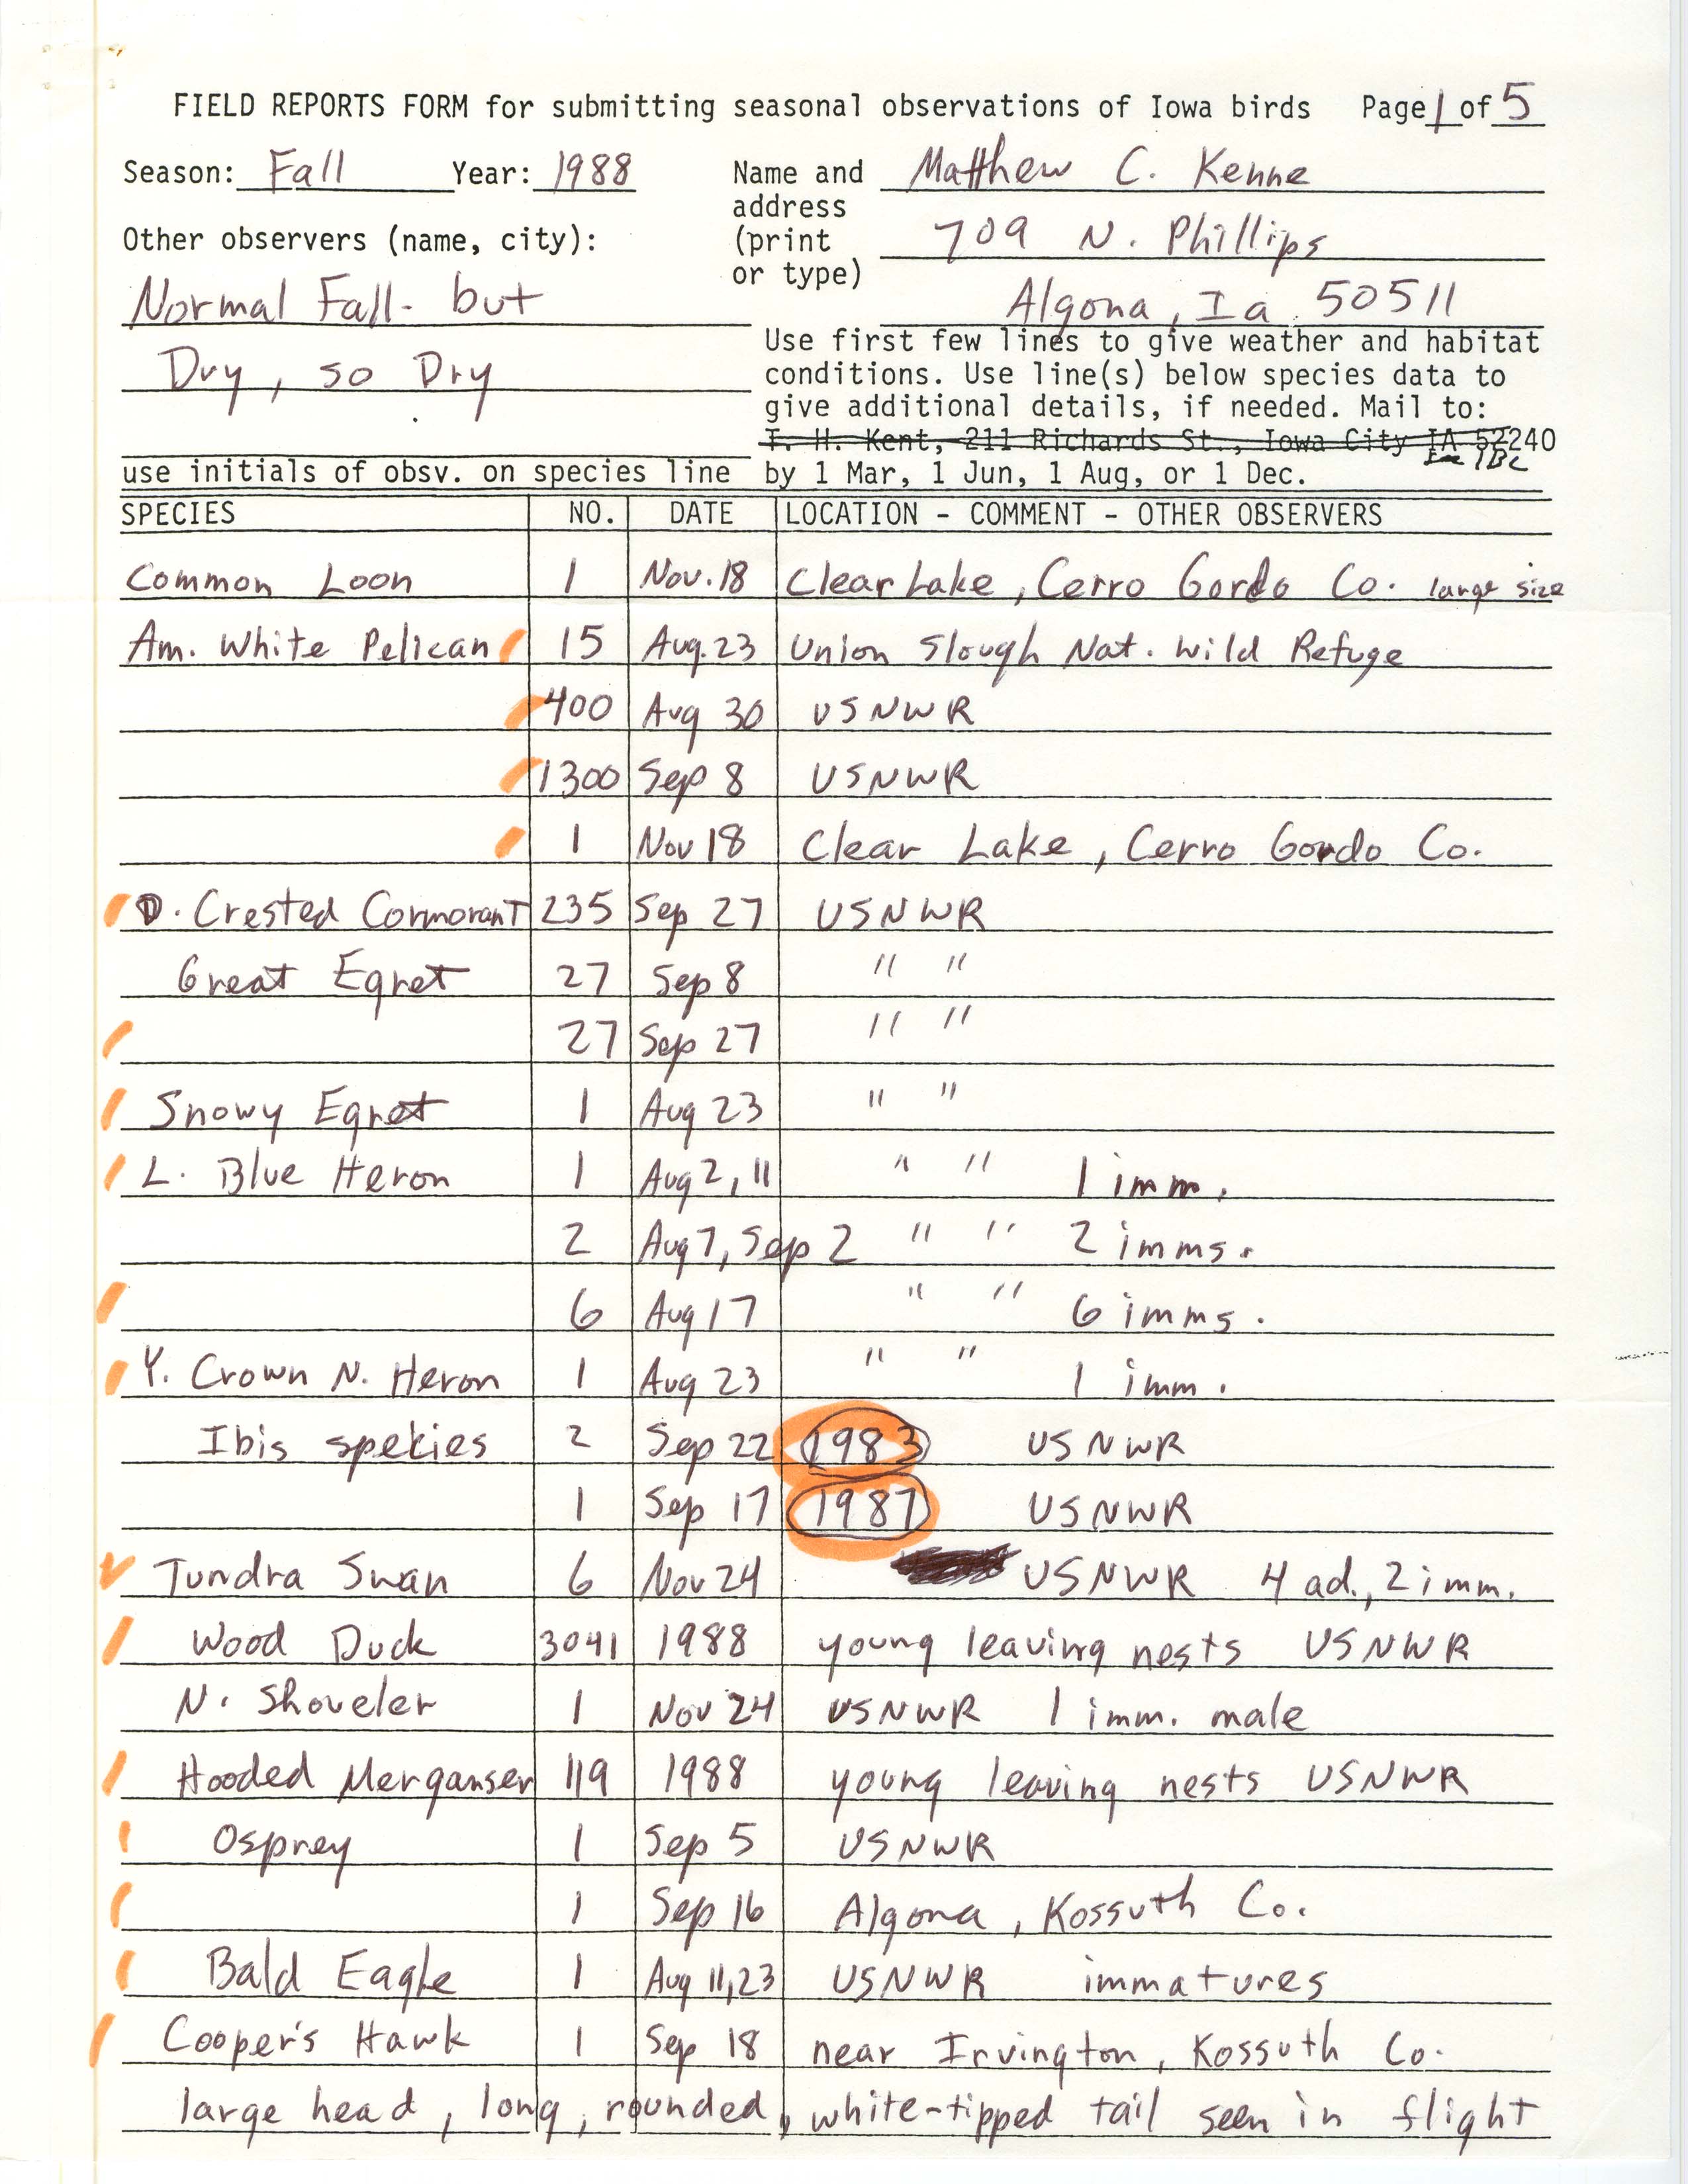 Field reports form for submitting seasonal observations of Iowa birds, Matthew Kenne, fall 1988